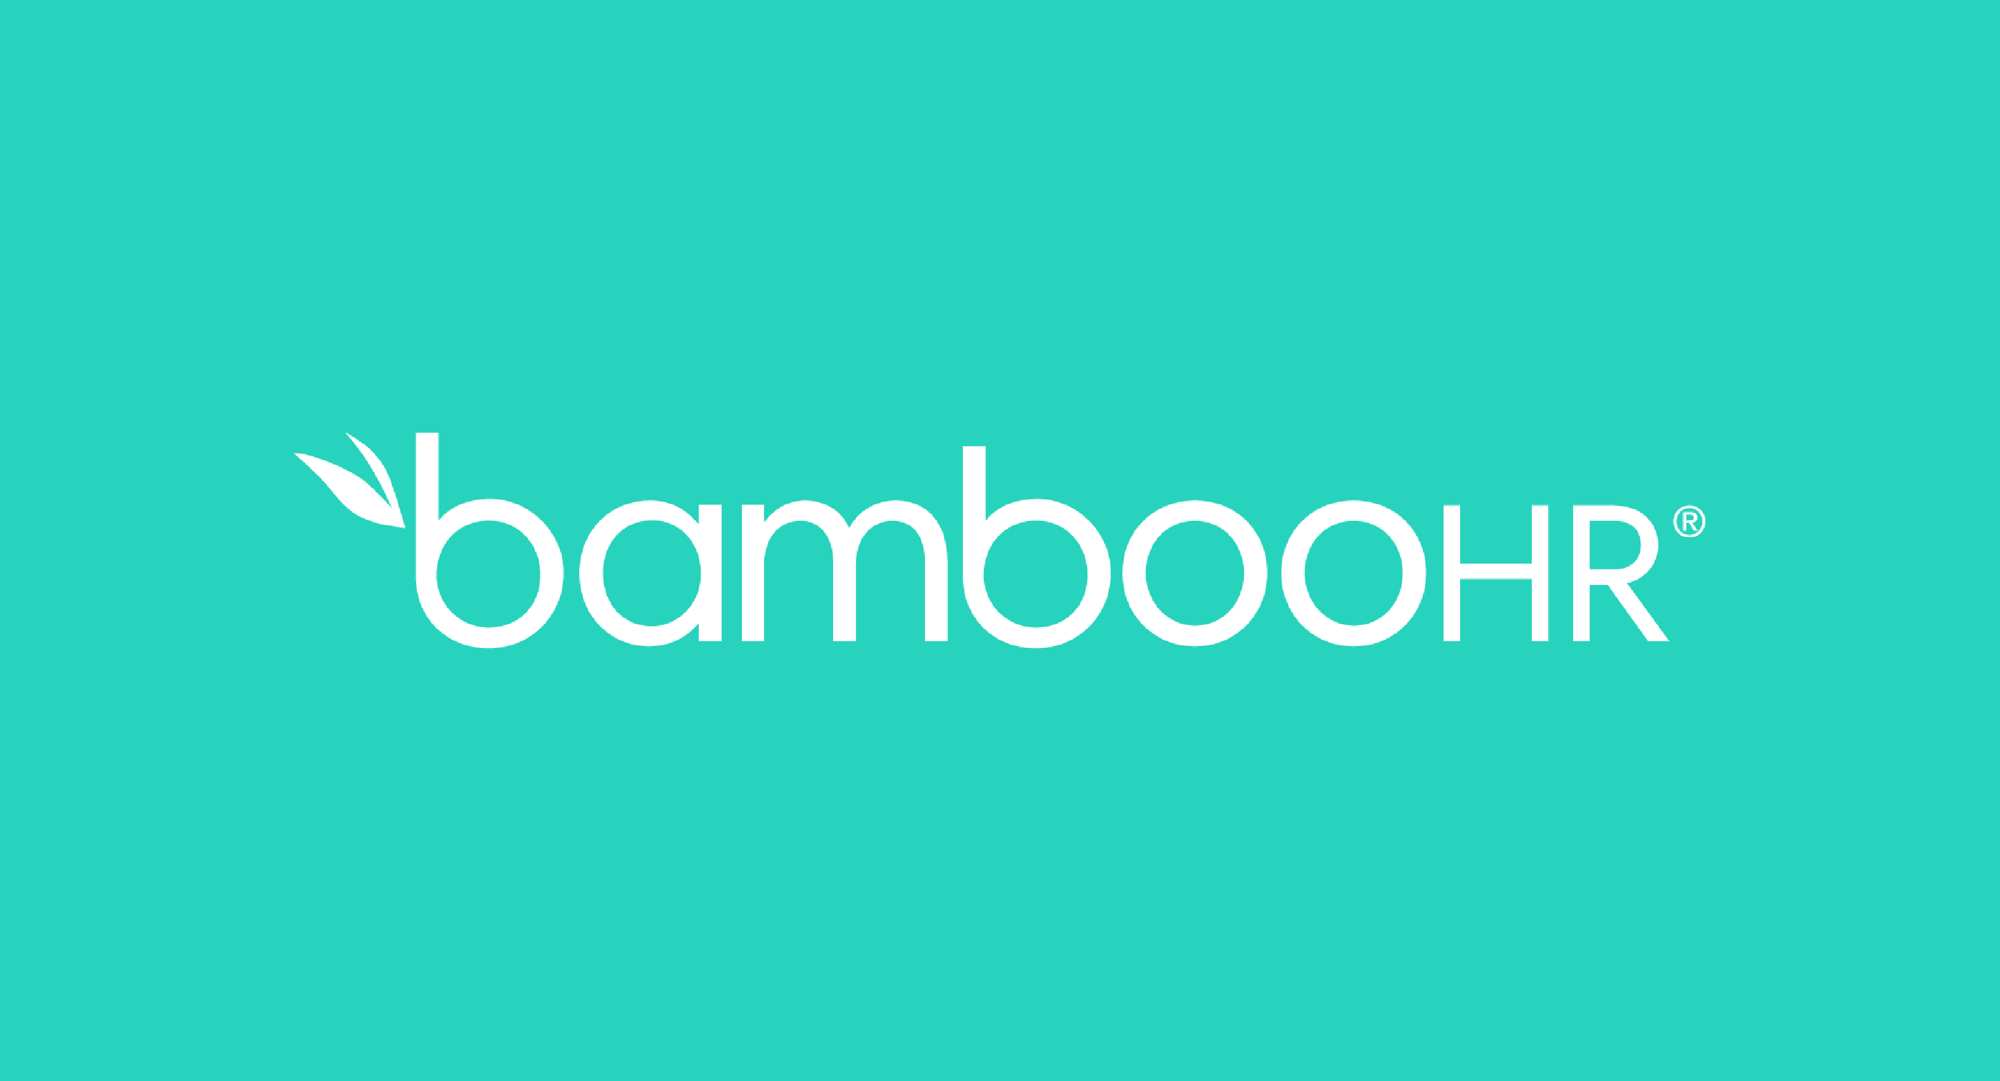 BambooHR Boosts Contact Requests With G2 + Chili Piper Integration